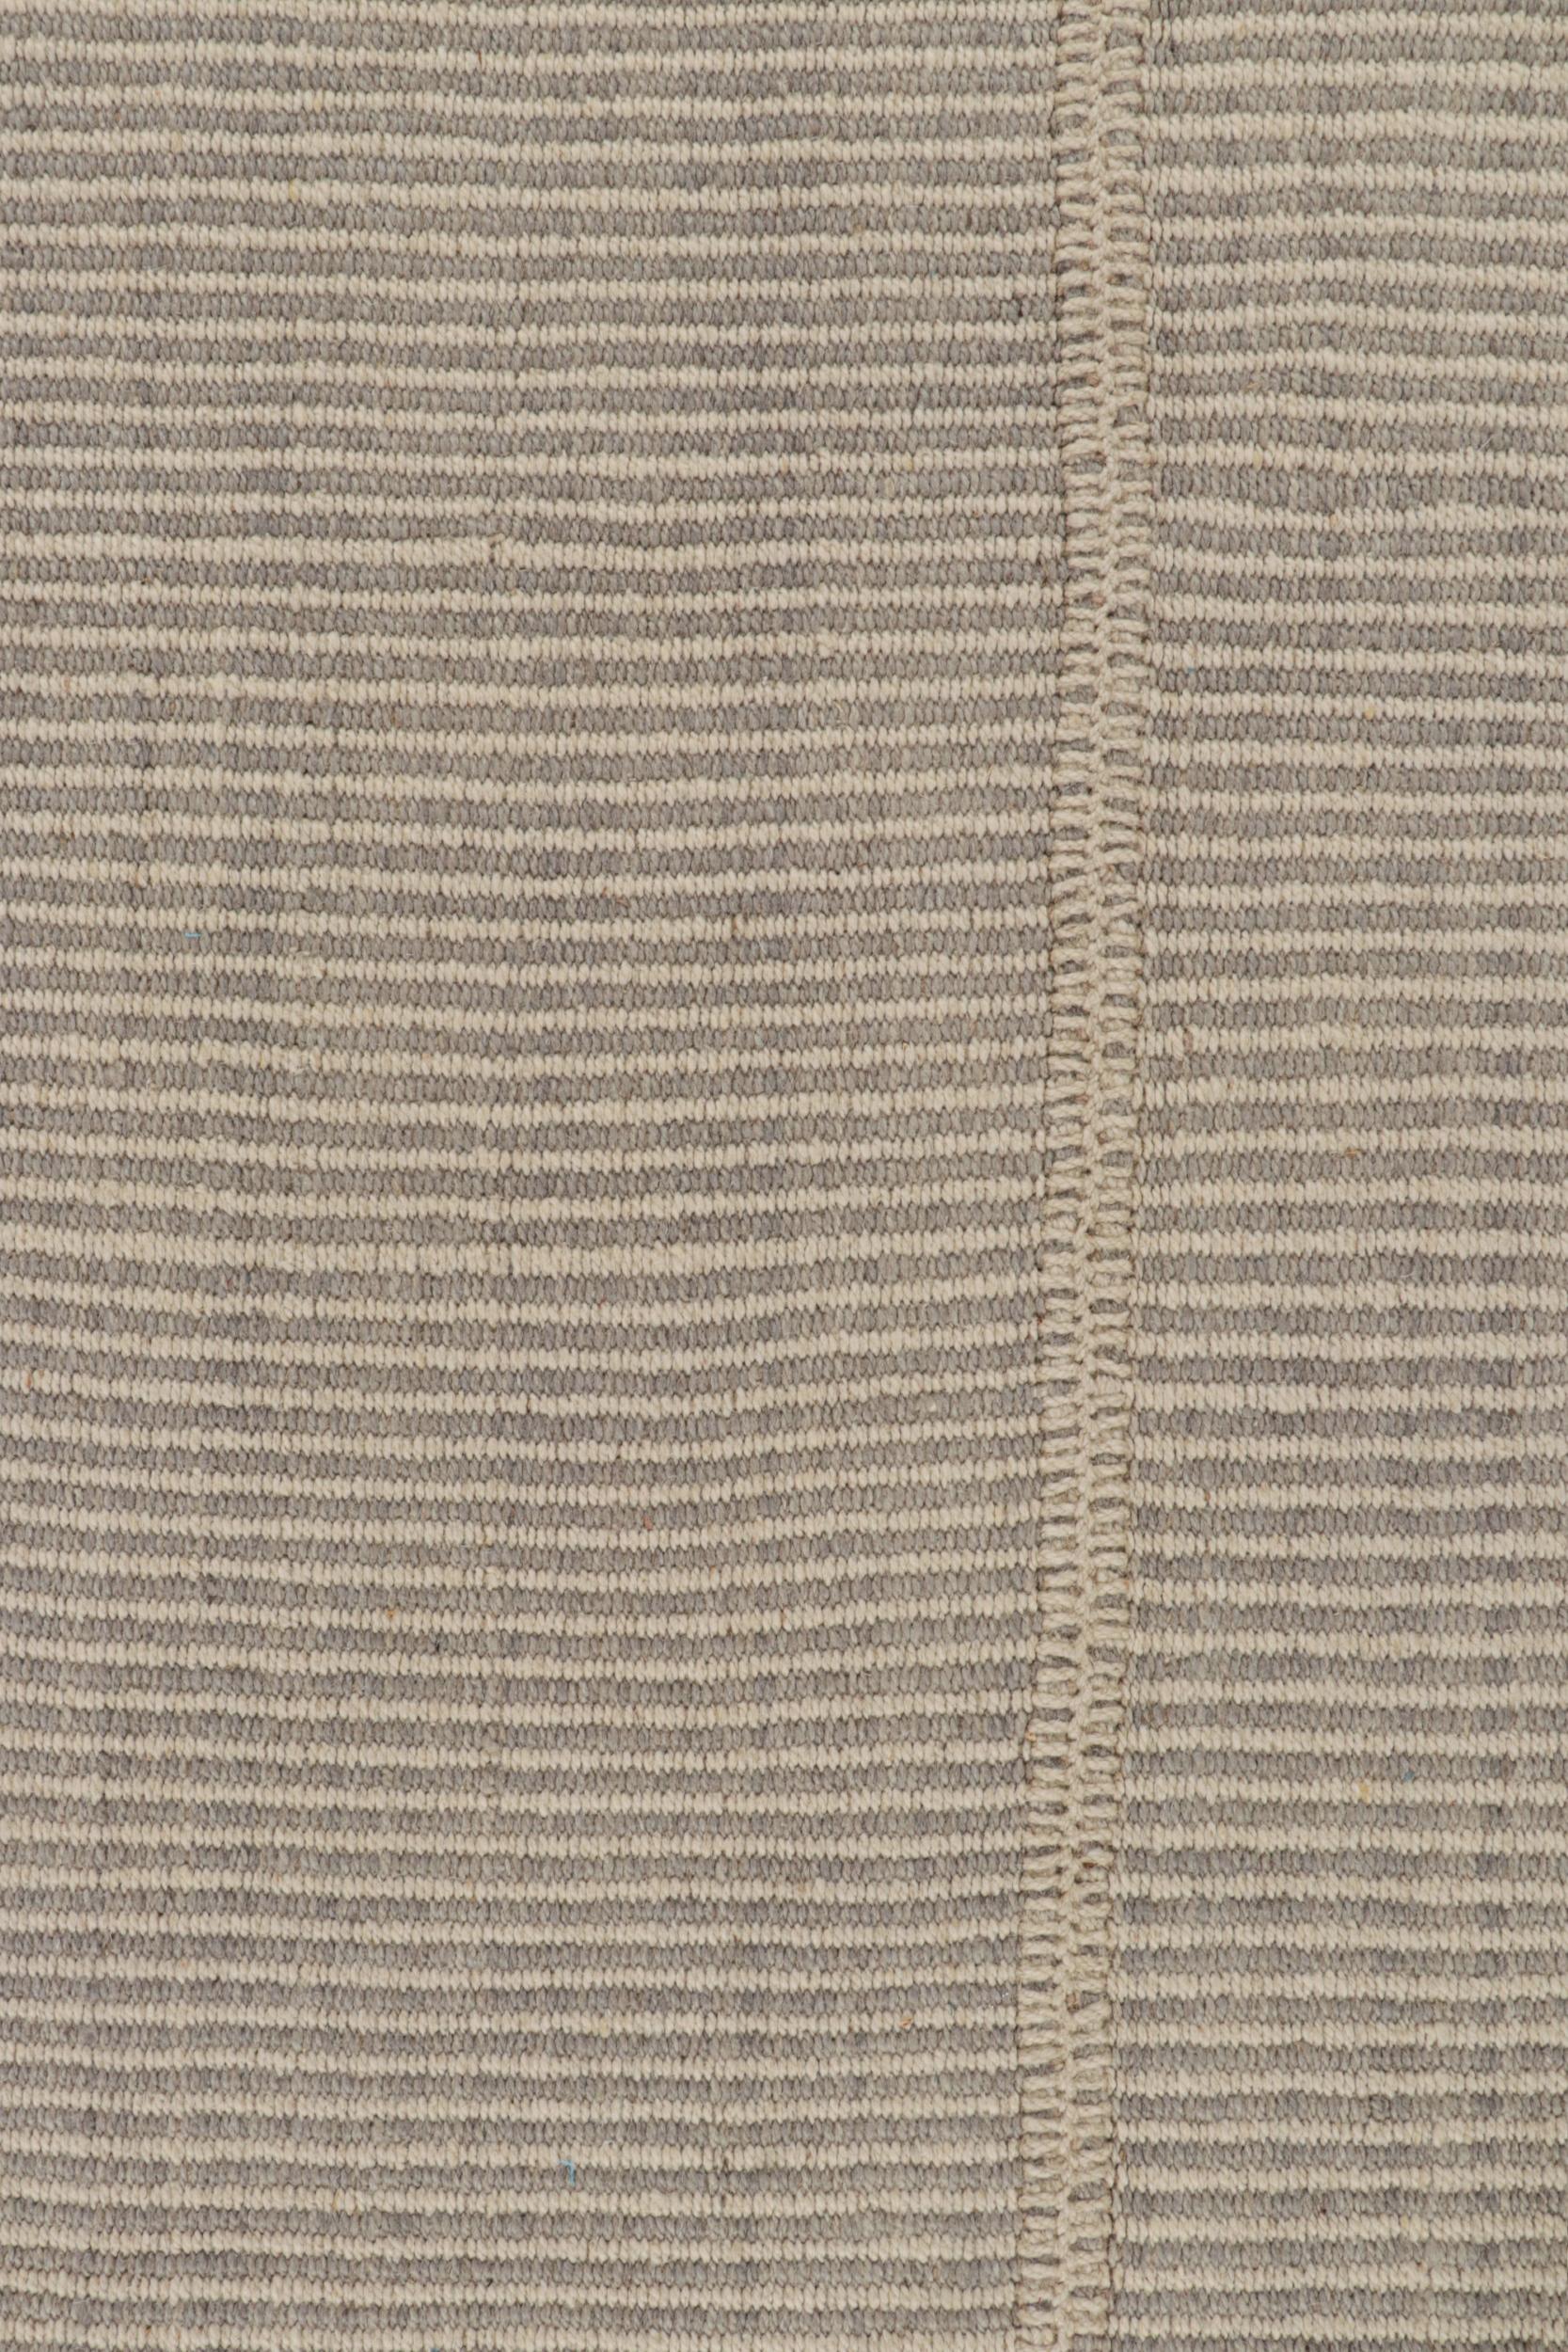 Rug & Kilim’s Contemporary Kilim in Gray & Cream In New Condition For Sale In Long Island City, NY